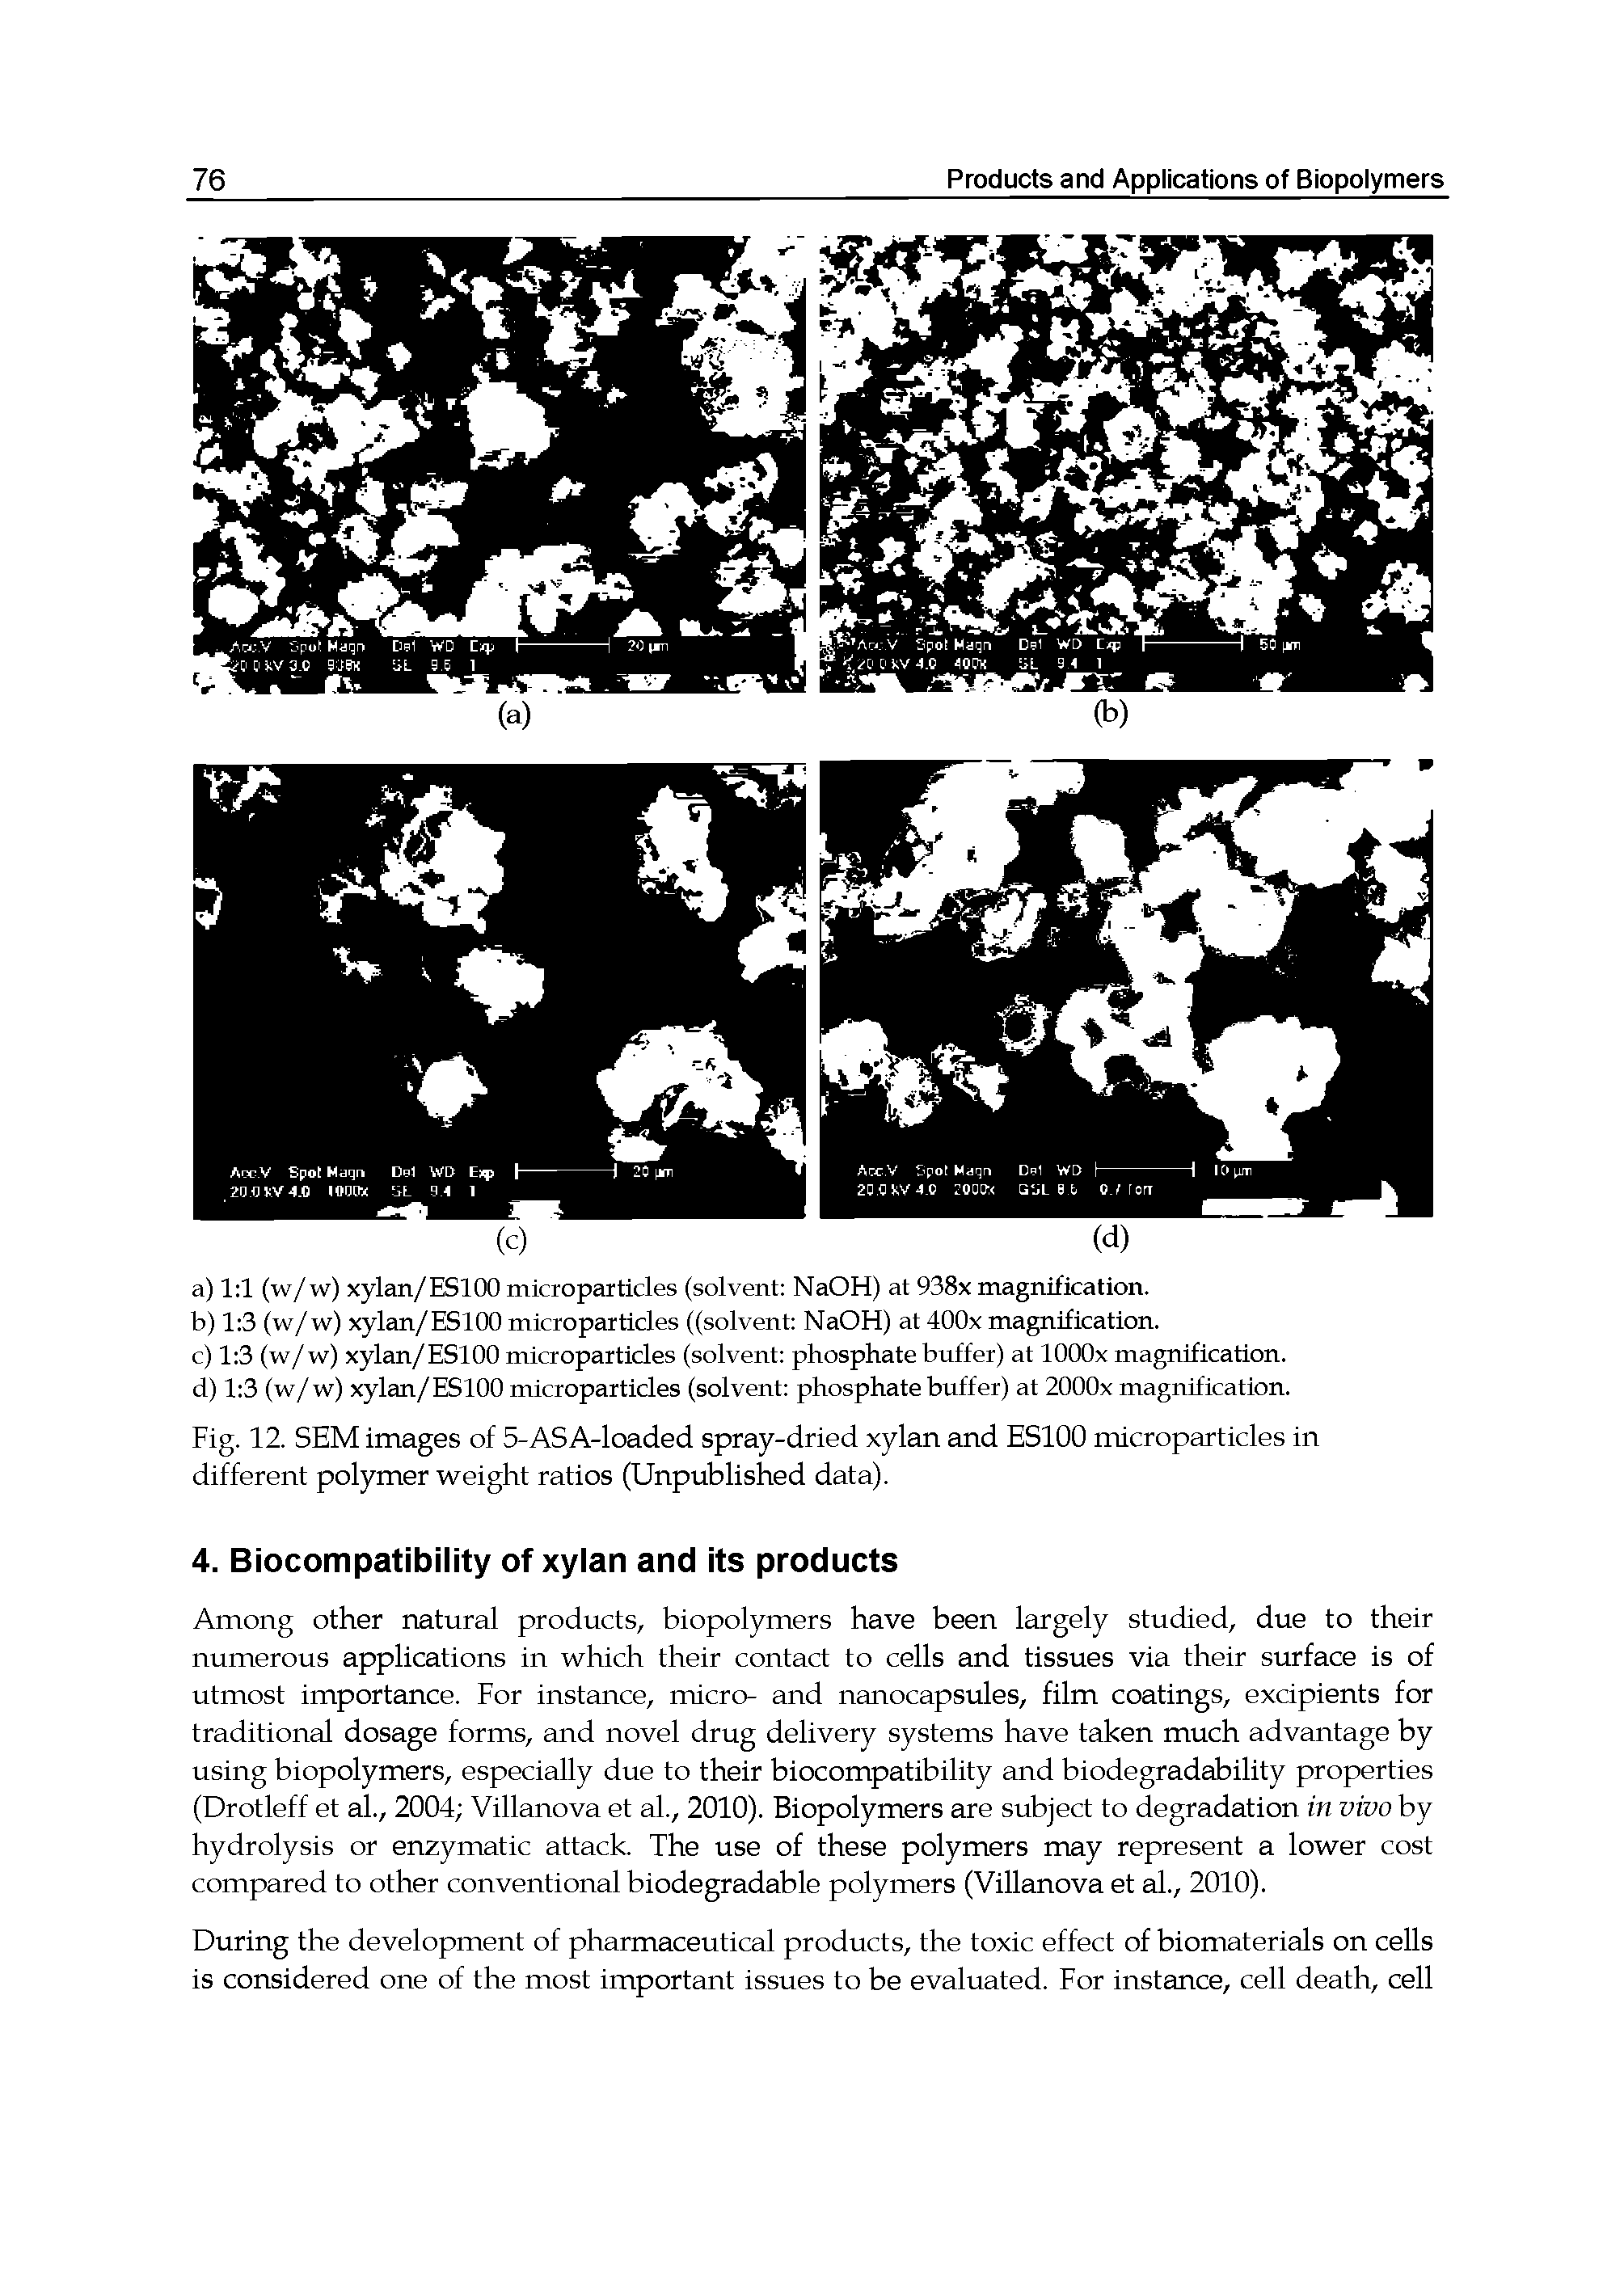 Fig. 12. SEM images of 5-ASA-loaded spray-dried xylan and ESIOO microparticles in different polymer weight ratios (Unpublished data).